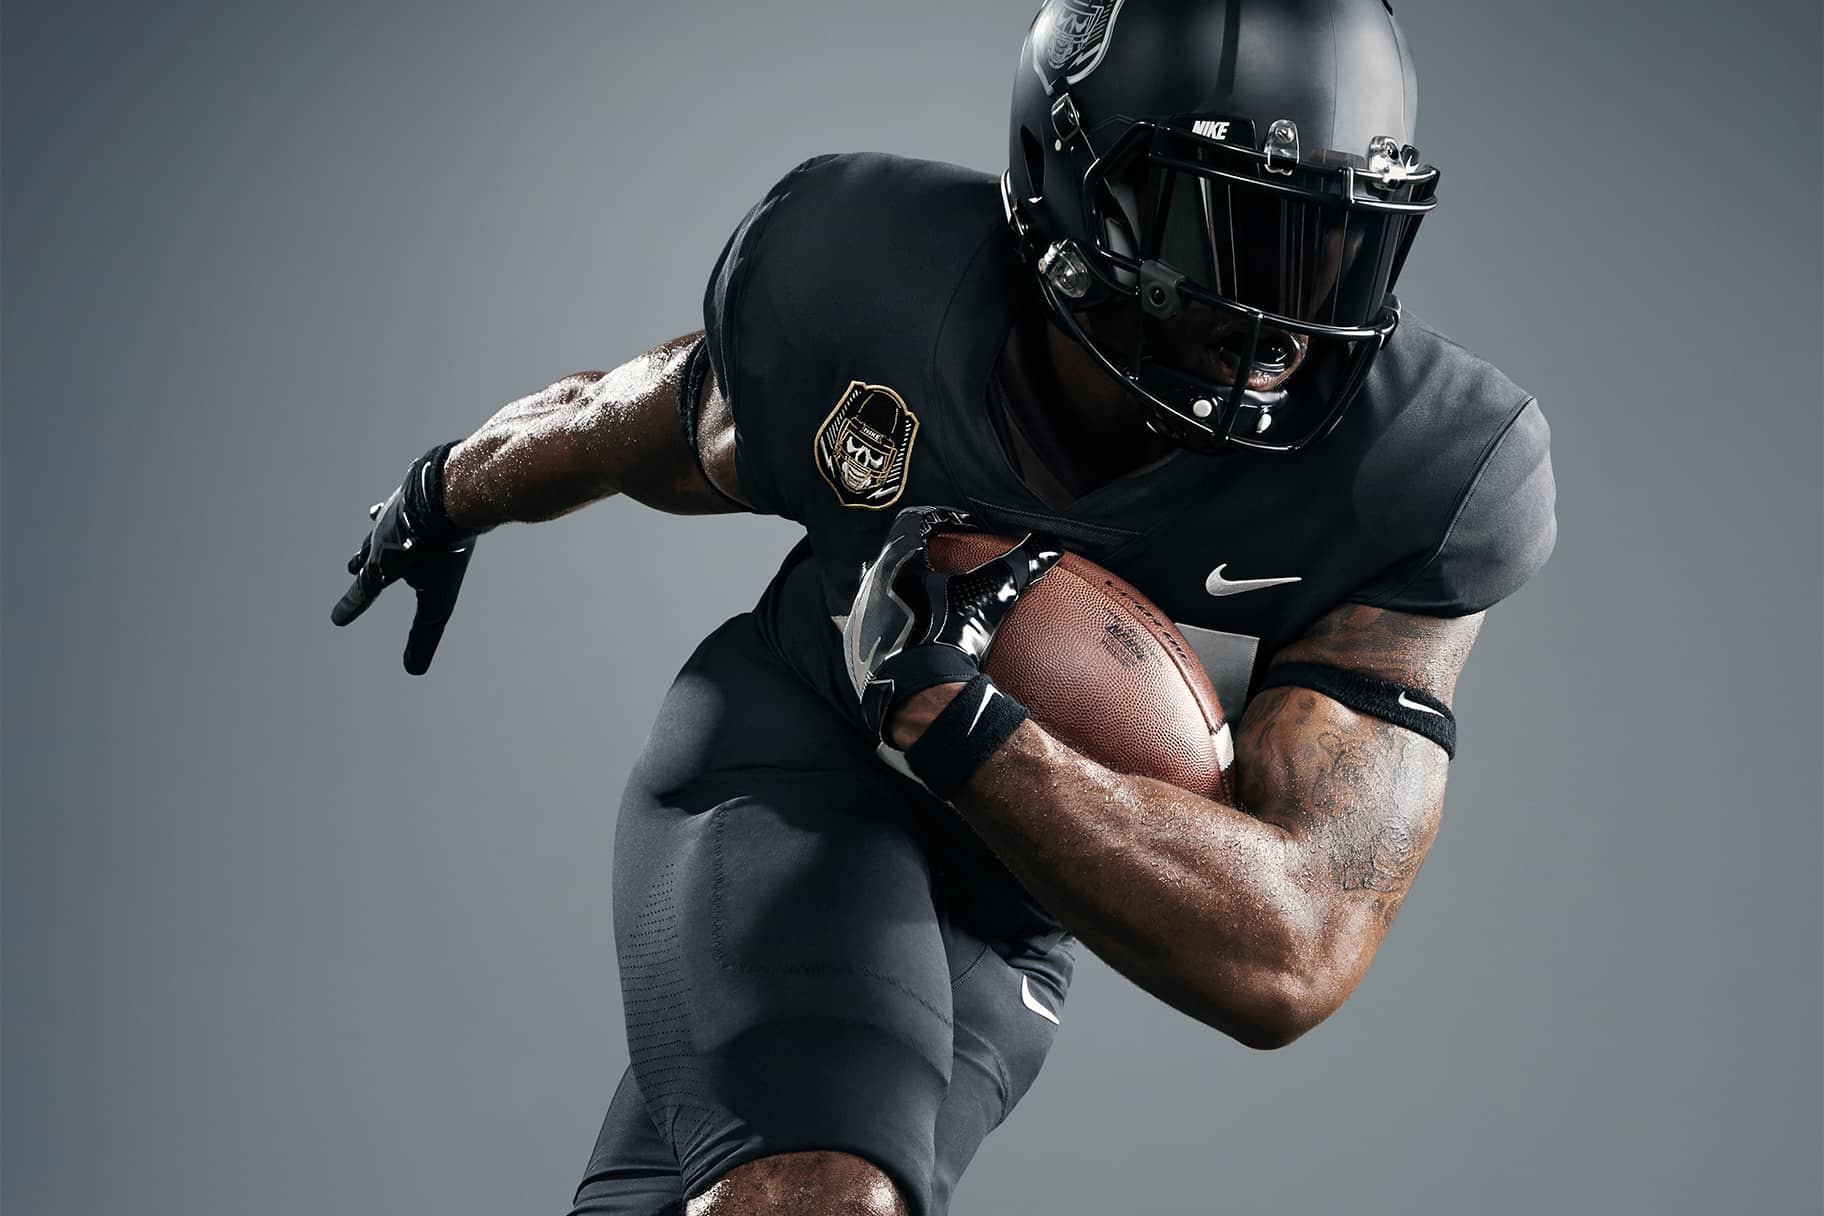 Essential Protective Football Gear To Buy This Season